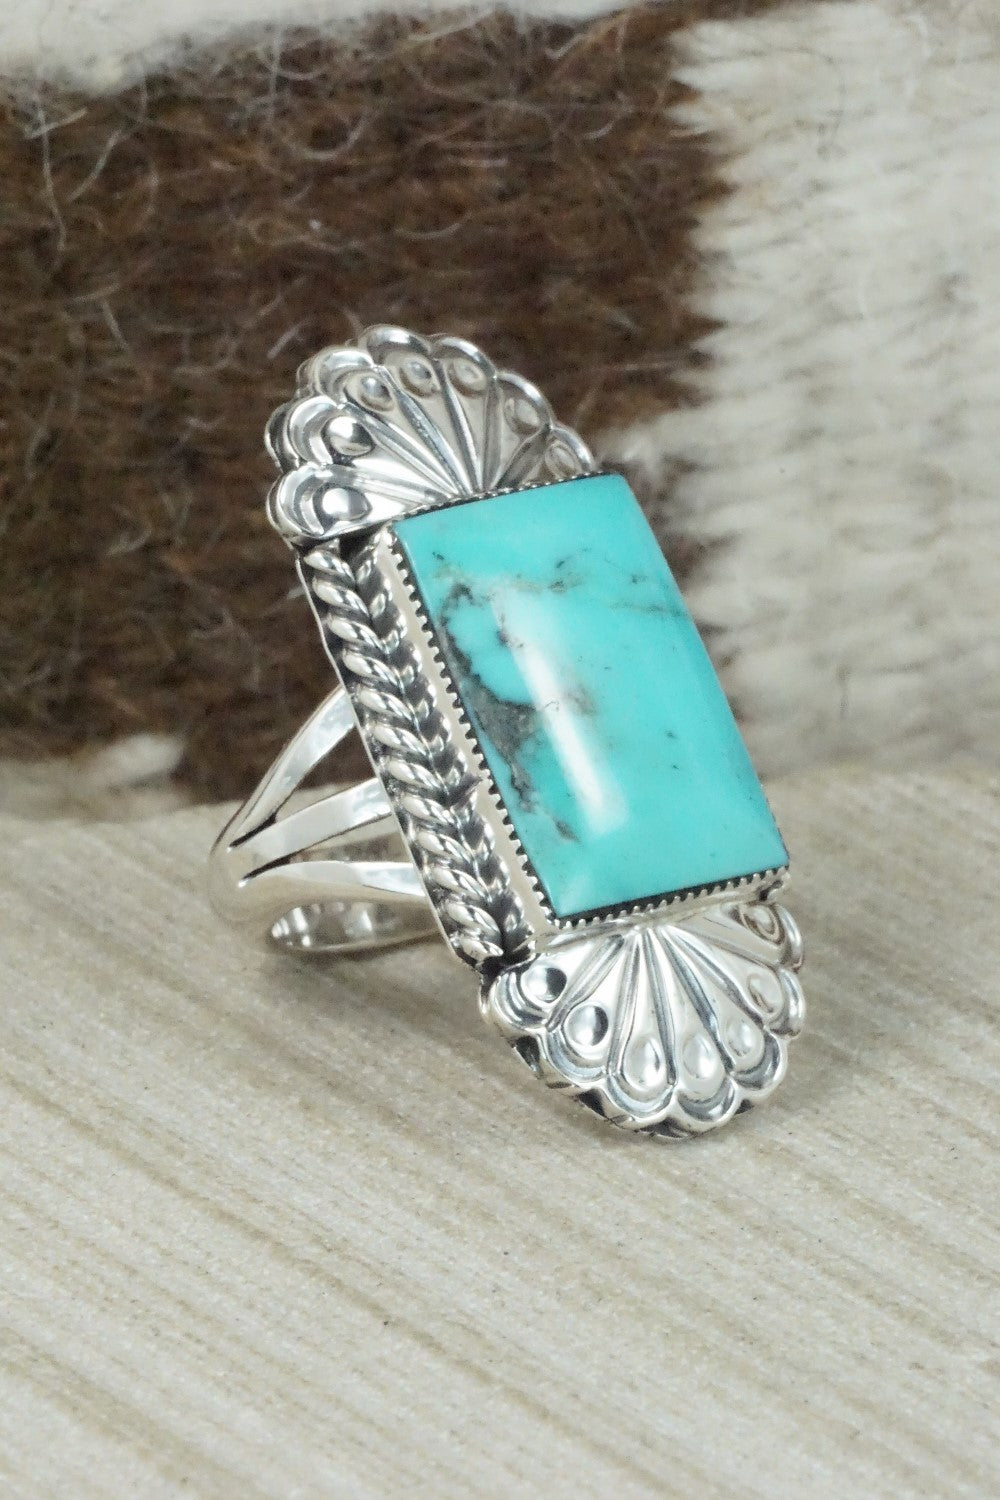 Turquoise & Sterling Silver Ring - Sheena Jack - Size 7